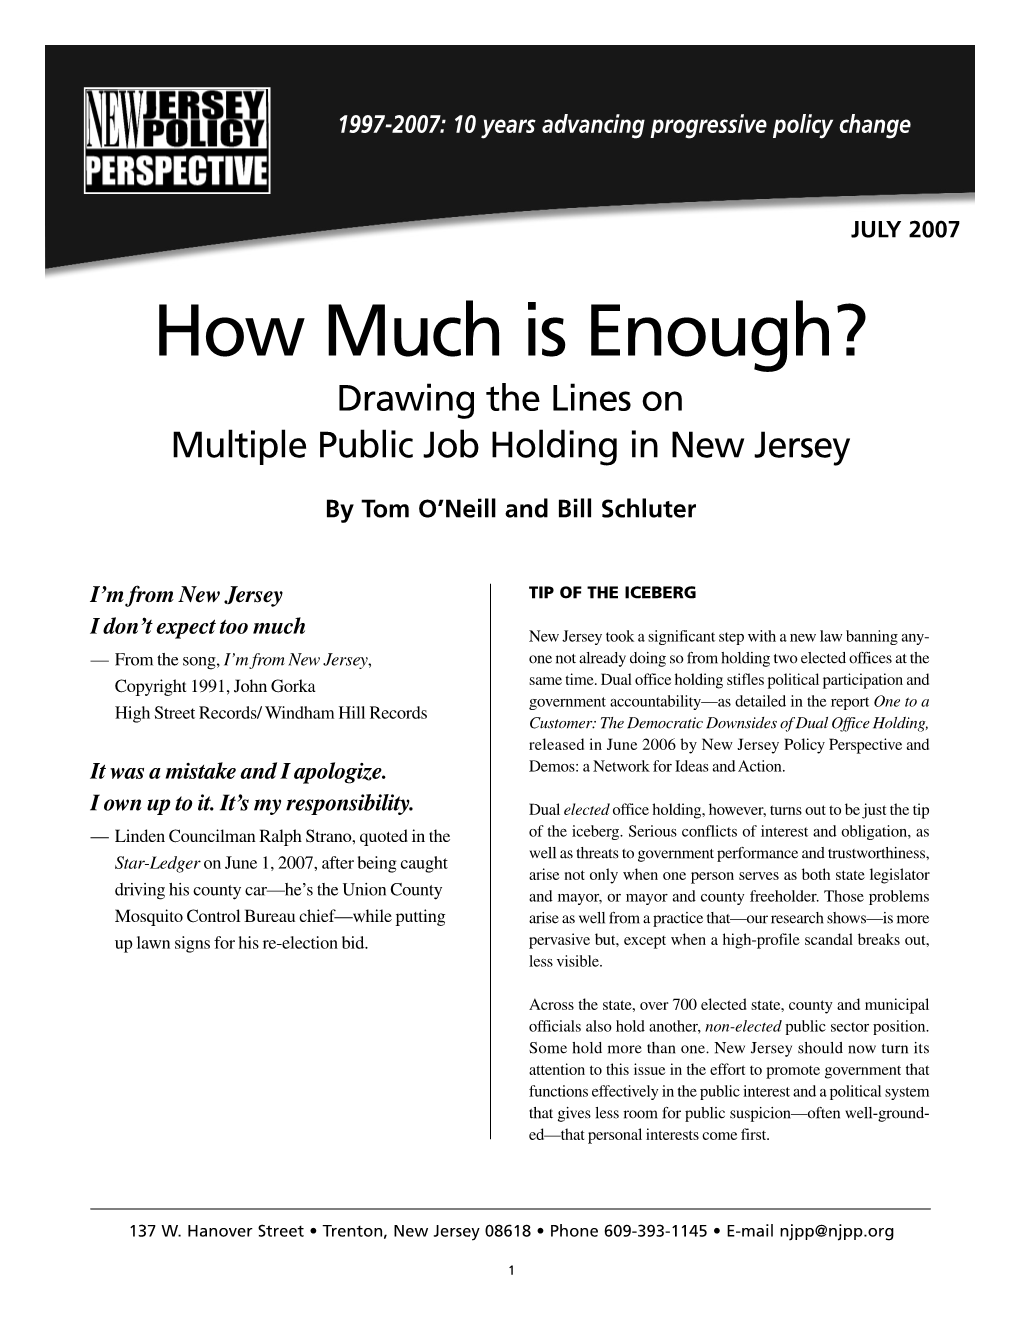 How Much Is Enough? Drawing the Lines on Multiple Public Job Holding in New Jersey